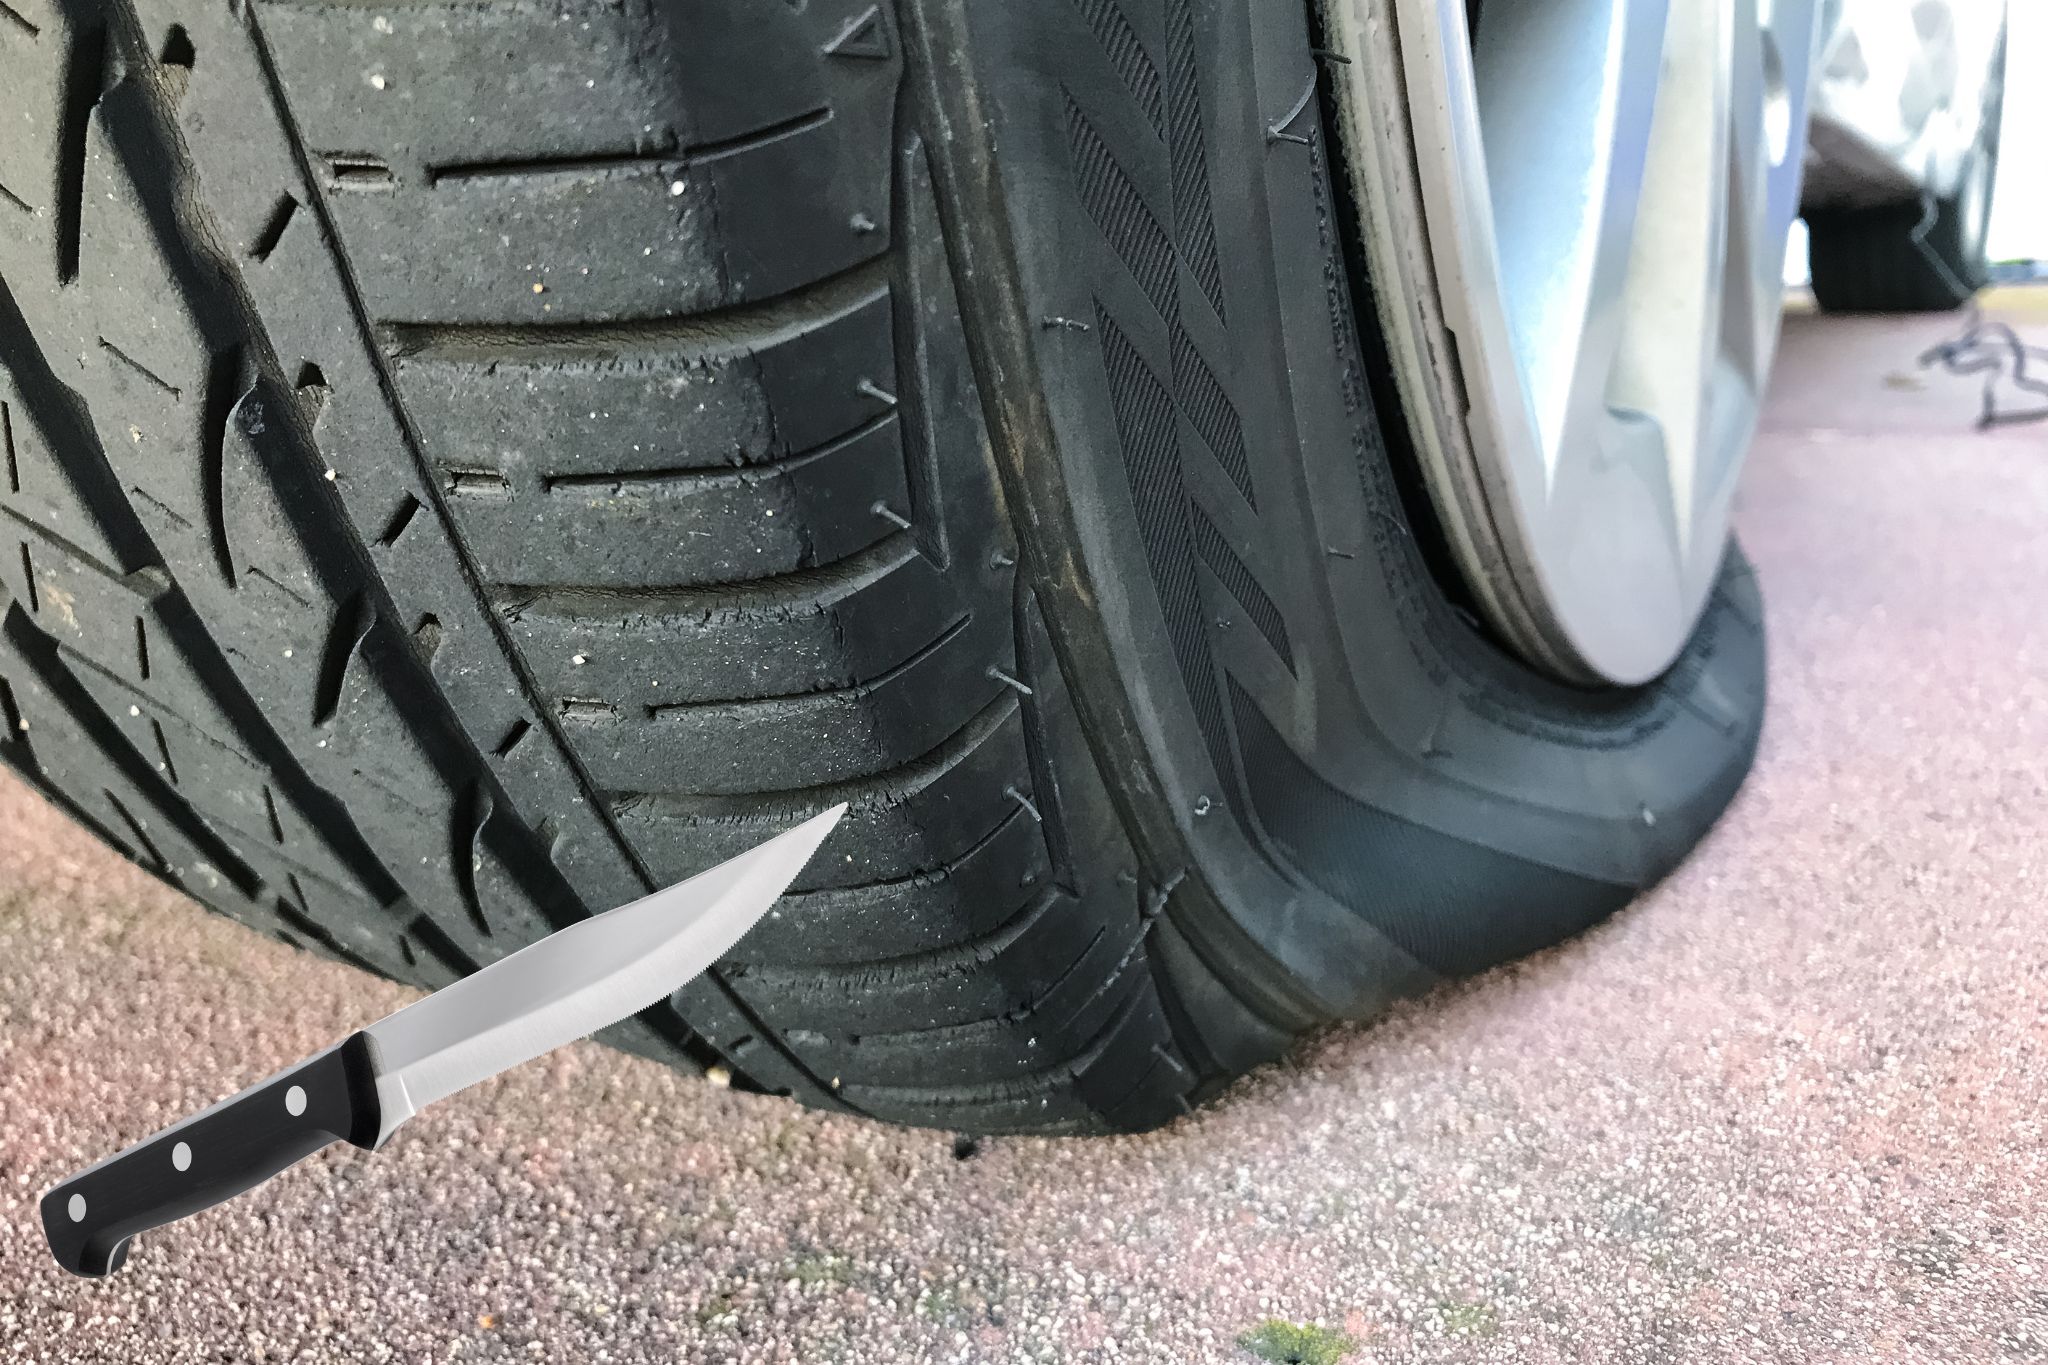 How To Prove Someone Slashed Your Tires